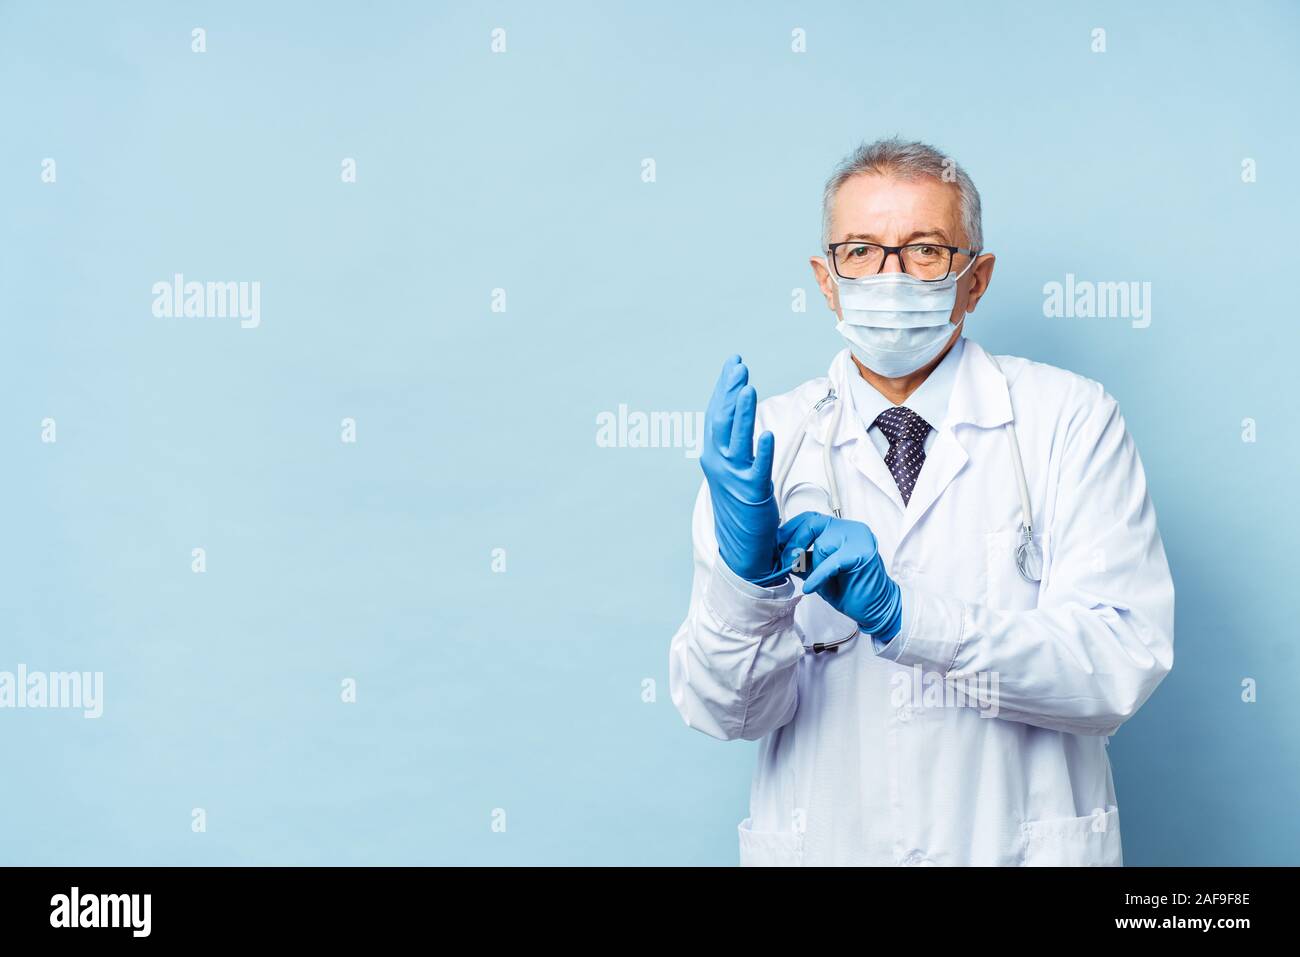 doctor puts on rubber gloves, healthcare and medicine. Isolate on blue background Stock Photo